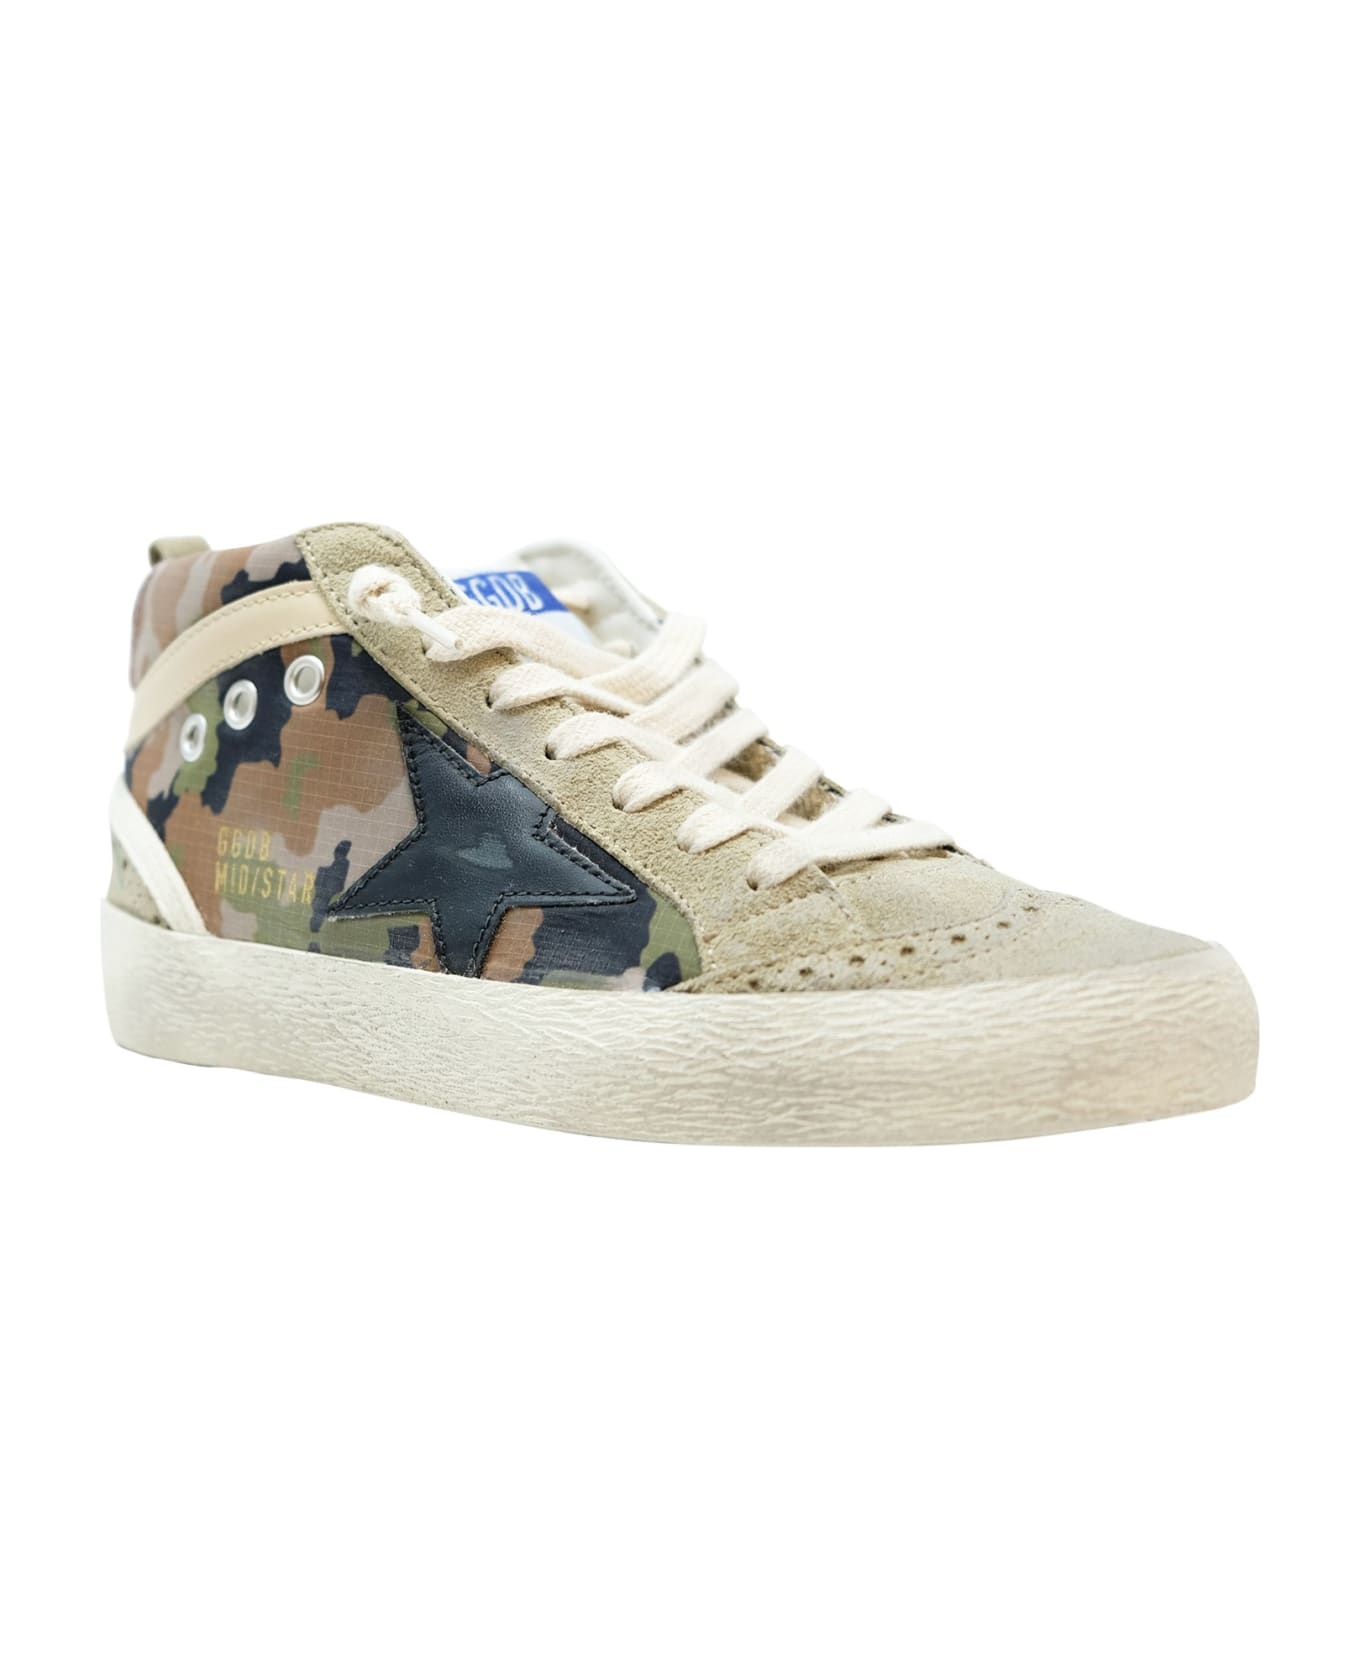 Golden Goose Mid Star Sneakers - CAMOUFLAGE